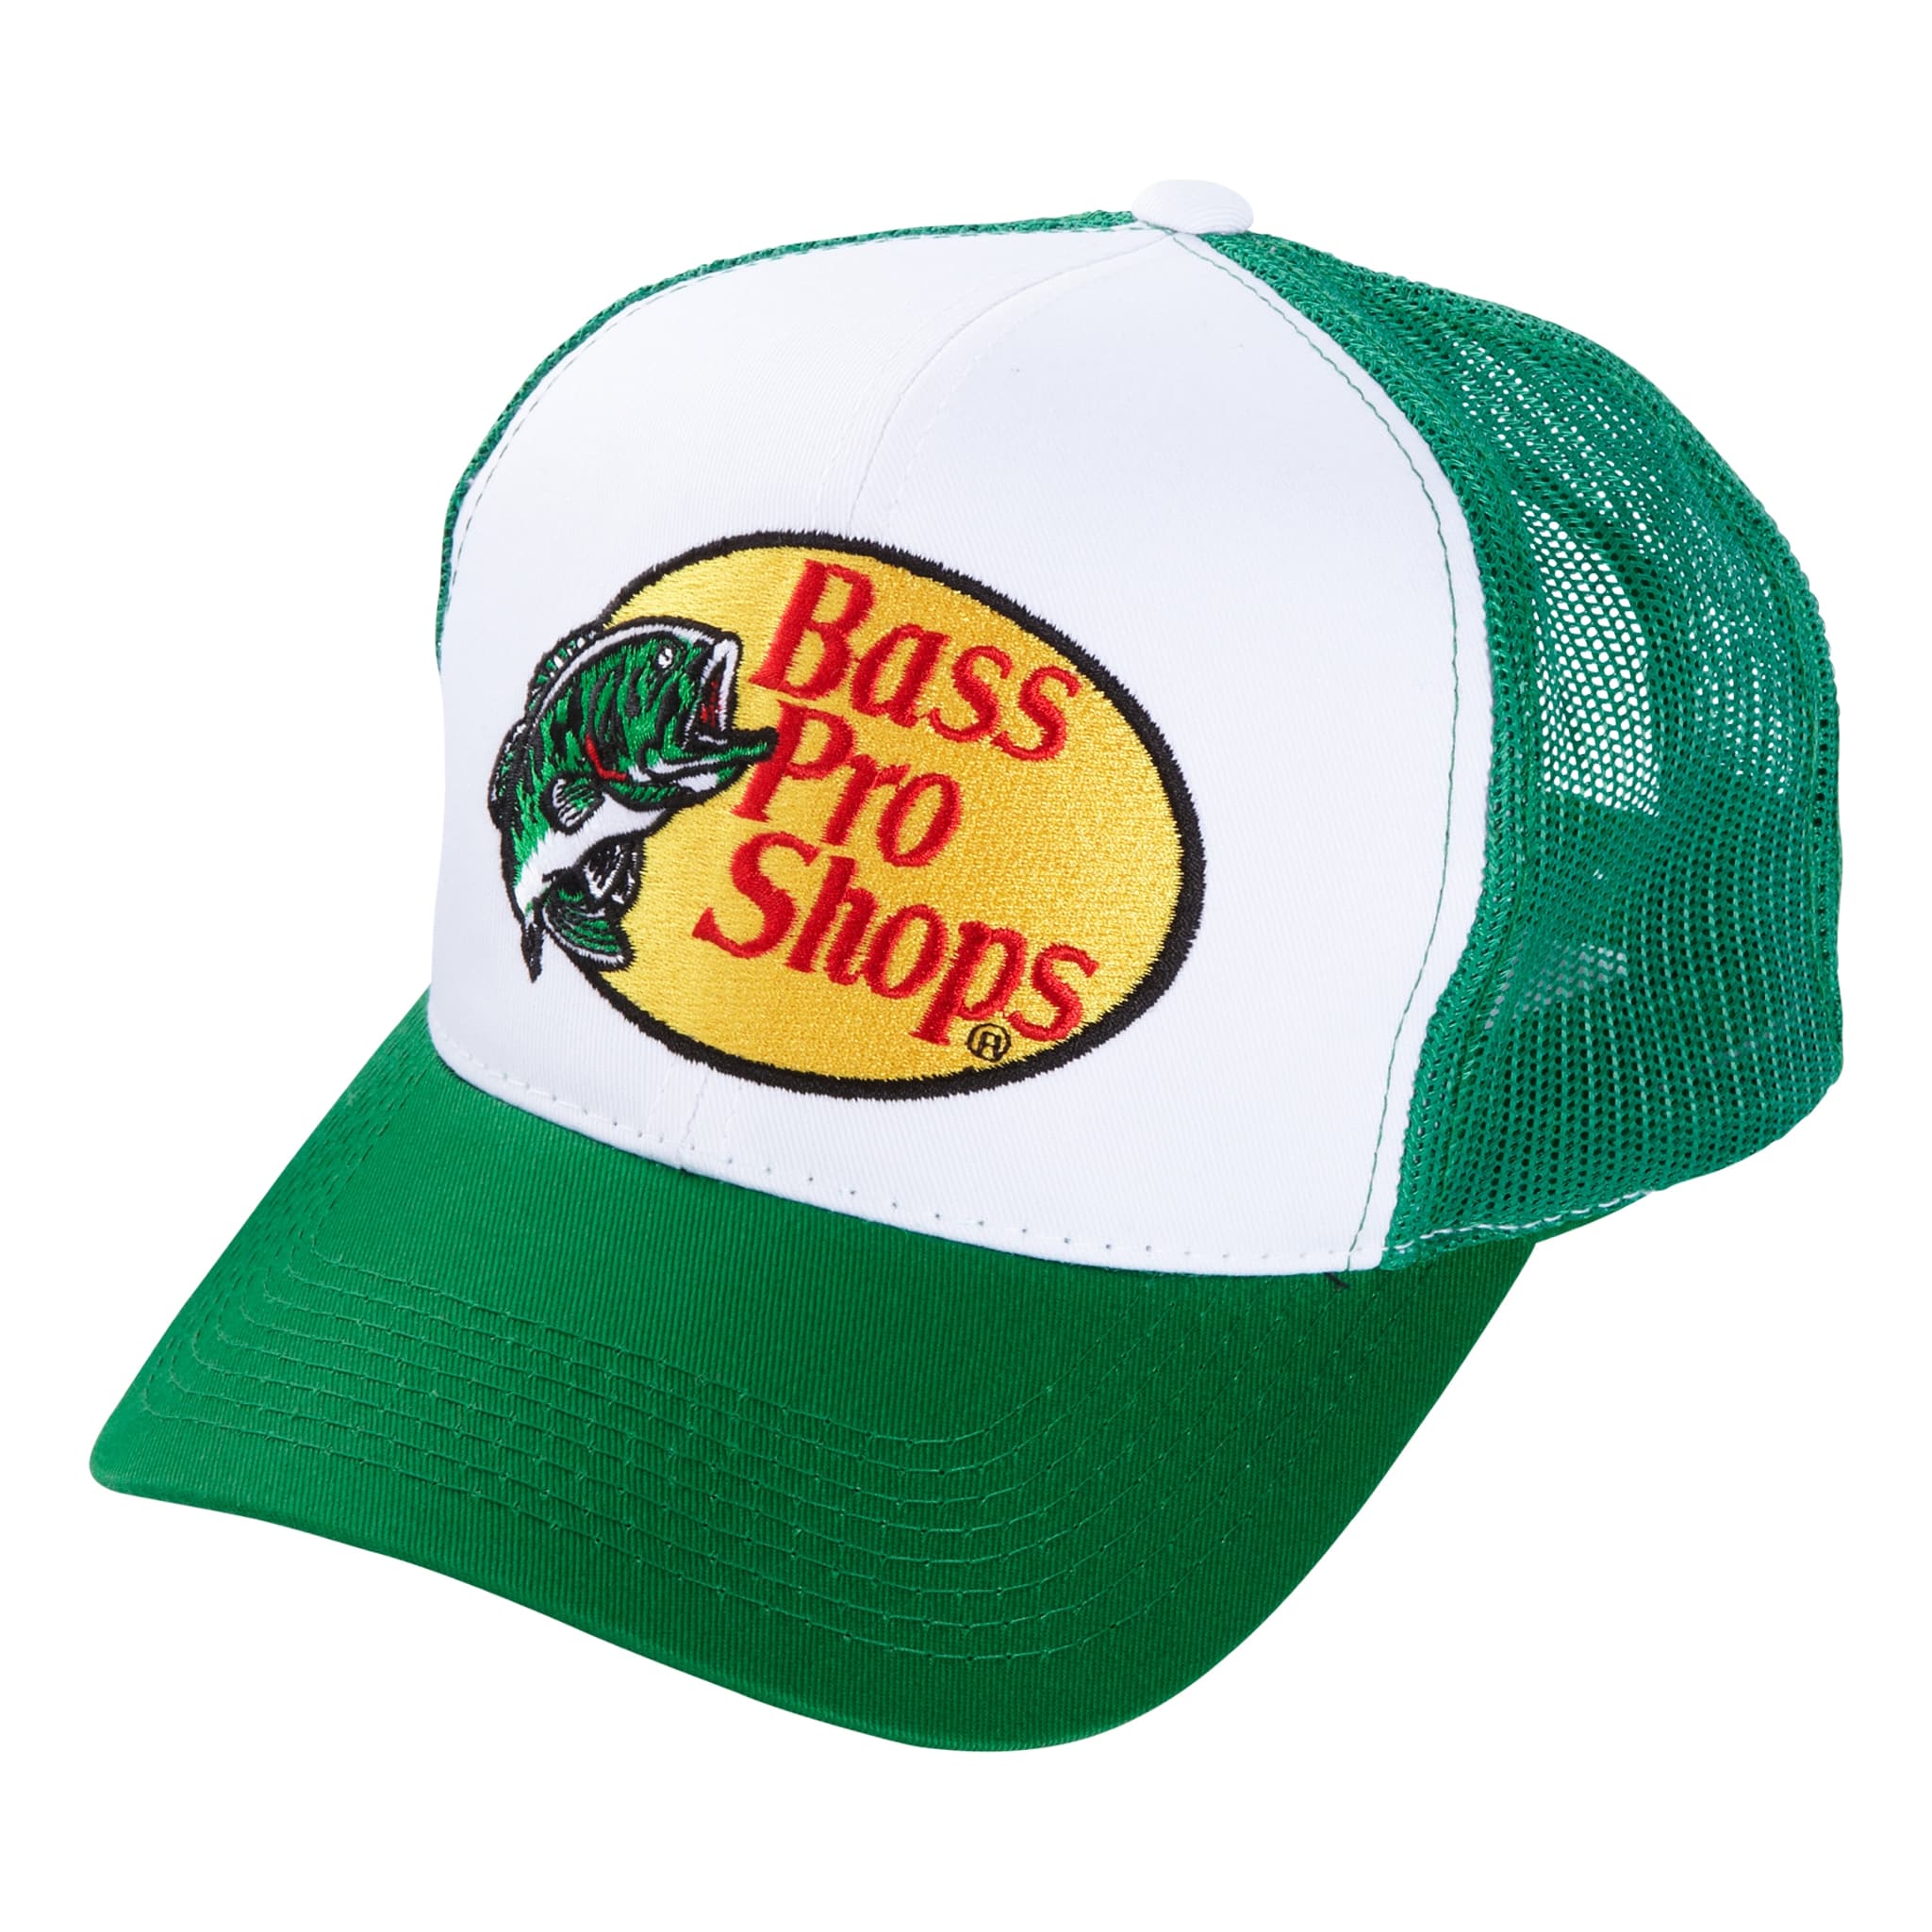 Bass Pro Shops® Embroidered Logo Mesh Caps - Green